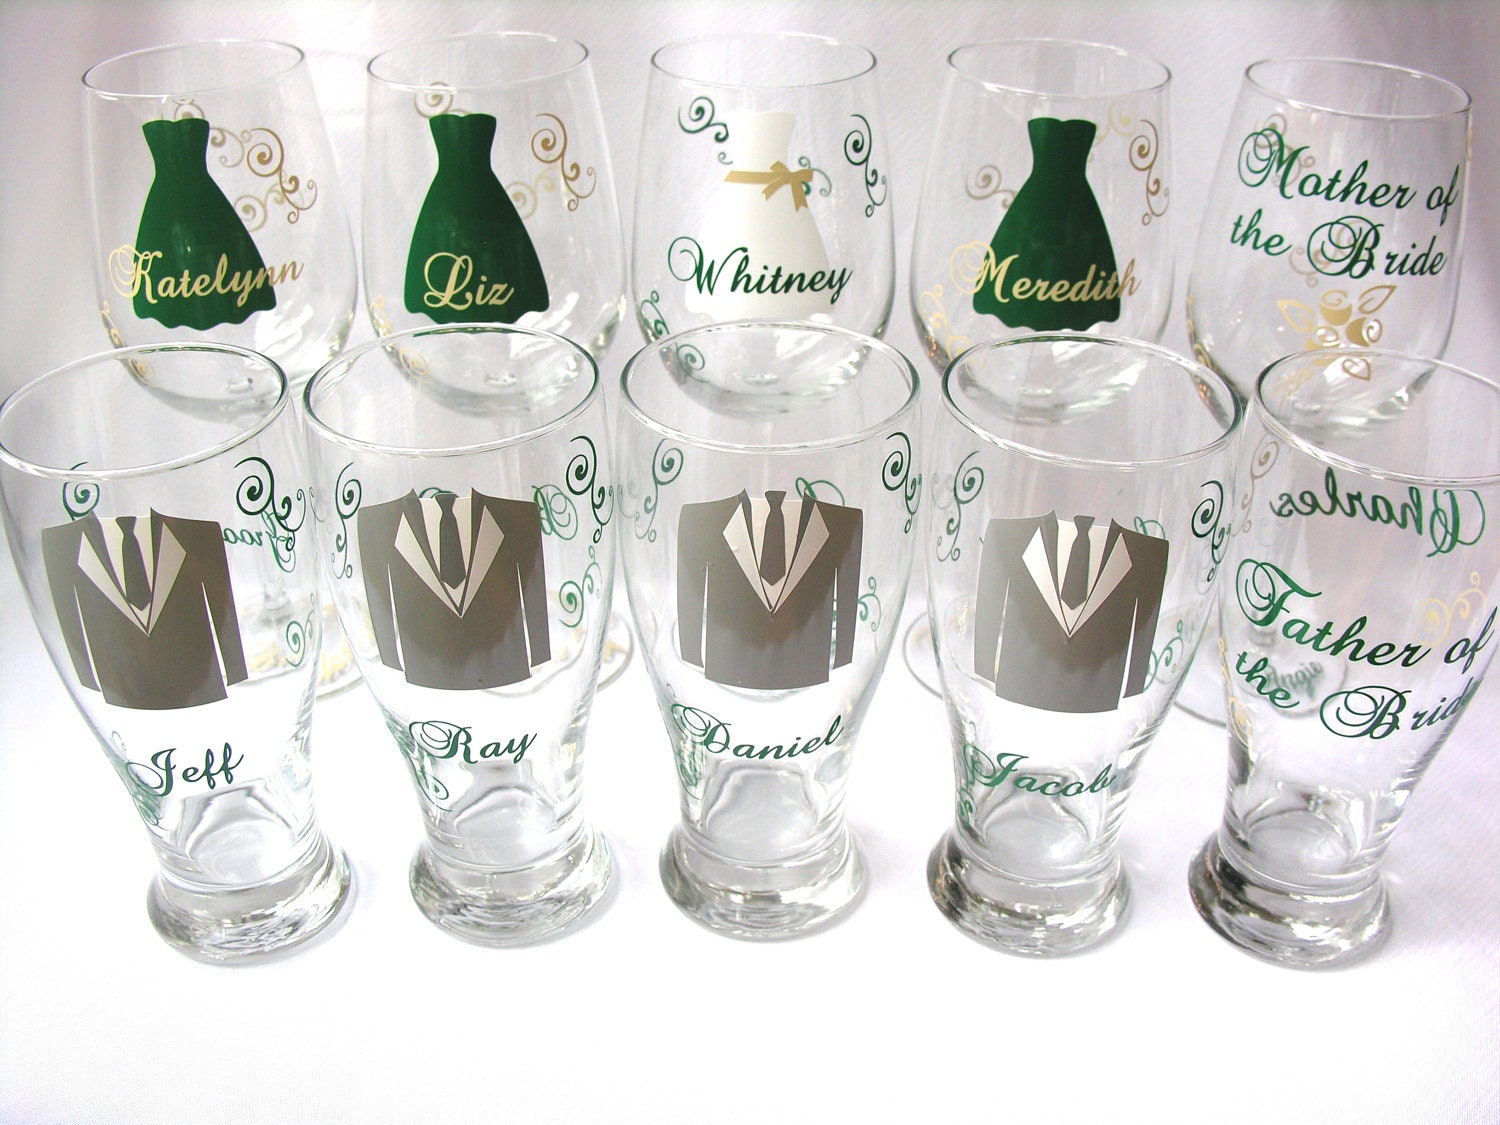 Wedding party glasses wine glasses and beer pilsner glasses.